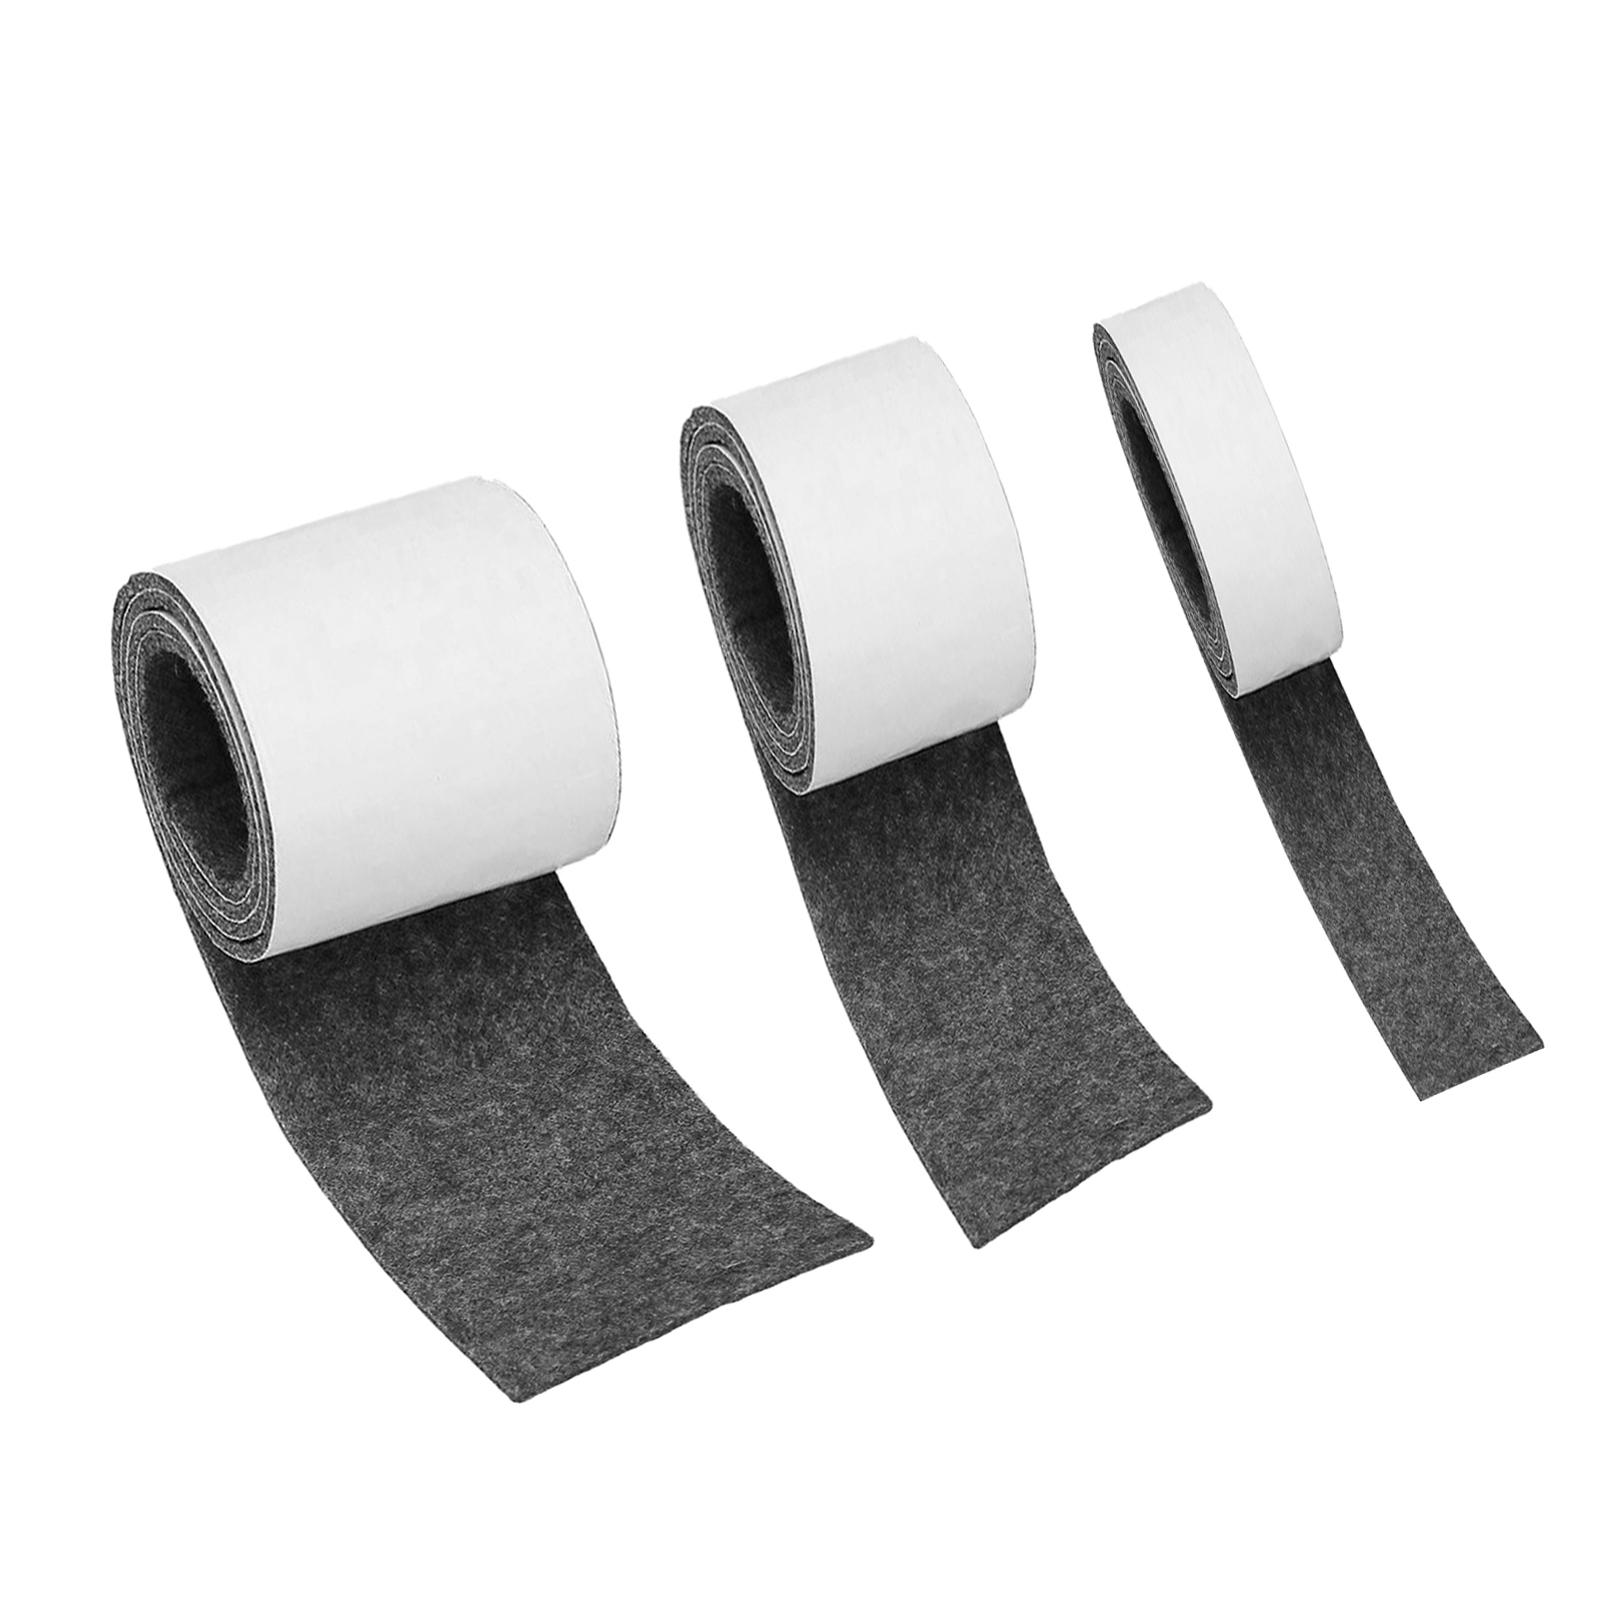 3 Rolls 100cm Self-Stick Heavy Duty Felt Strips Self Adhesive Felt Tapes  Polyester Felt Strip Rolls for Protecting Furniture and DIY Adhesive Gray 